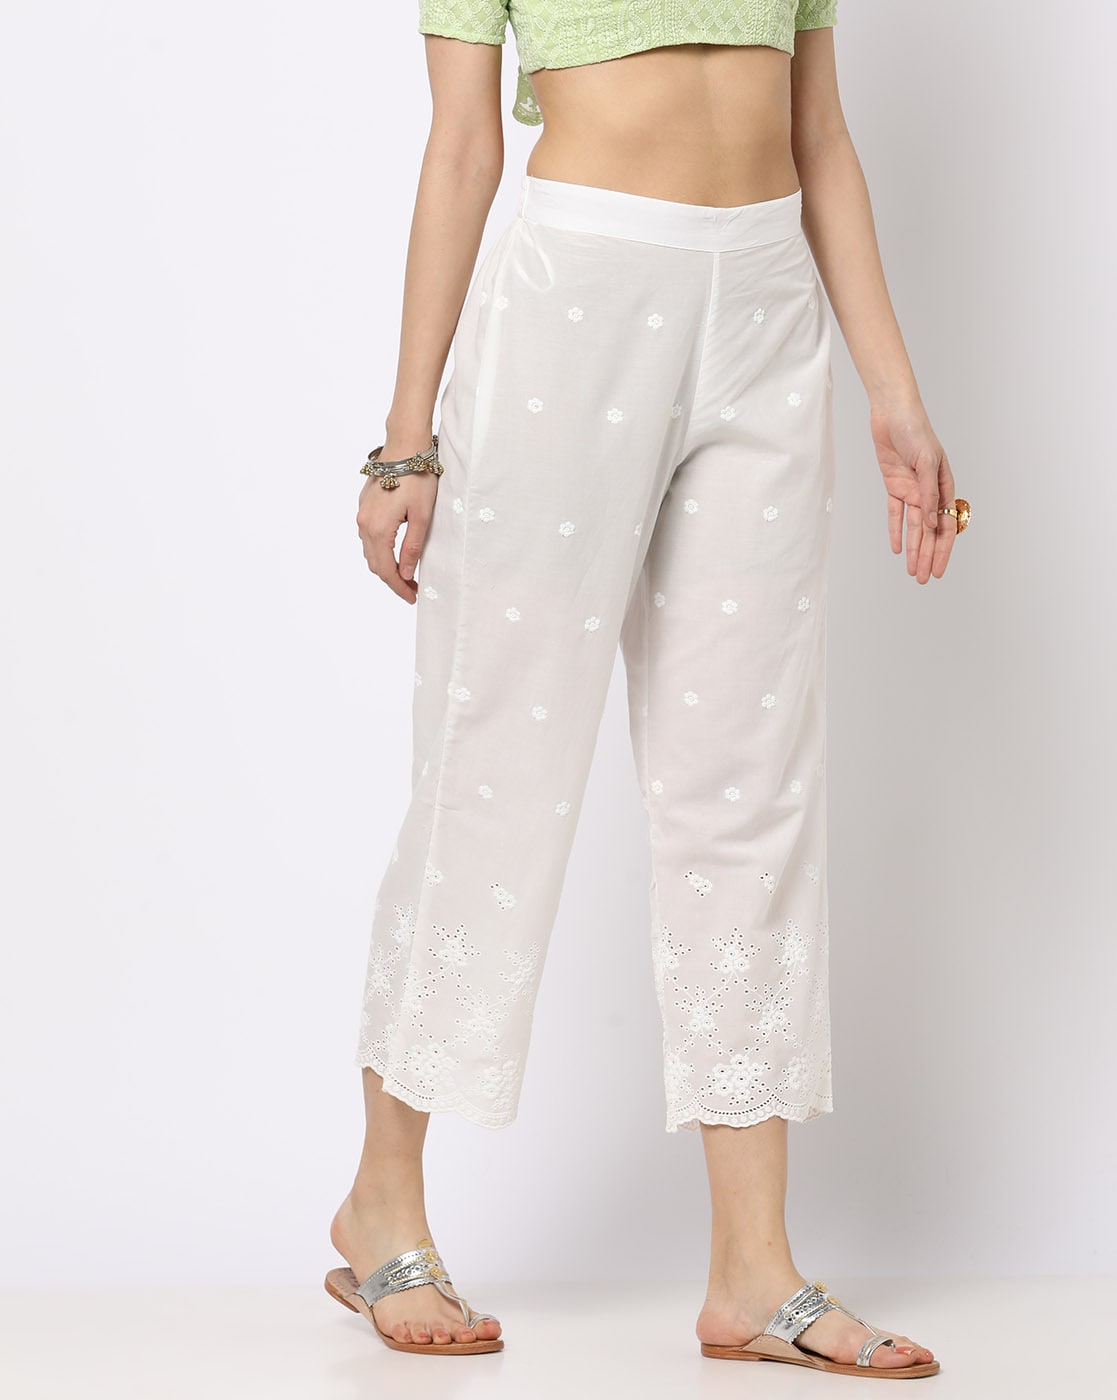 Buy Gold-Toned Pants for Women by AVAASA MIX N' MATCH Online | Ajio.com